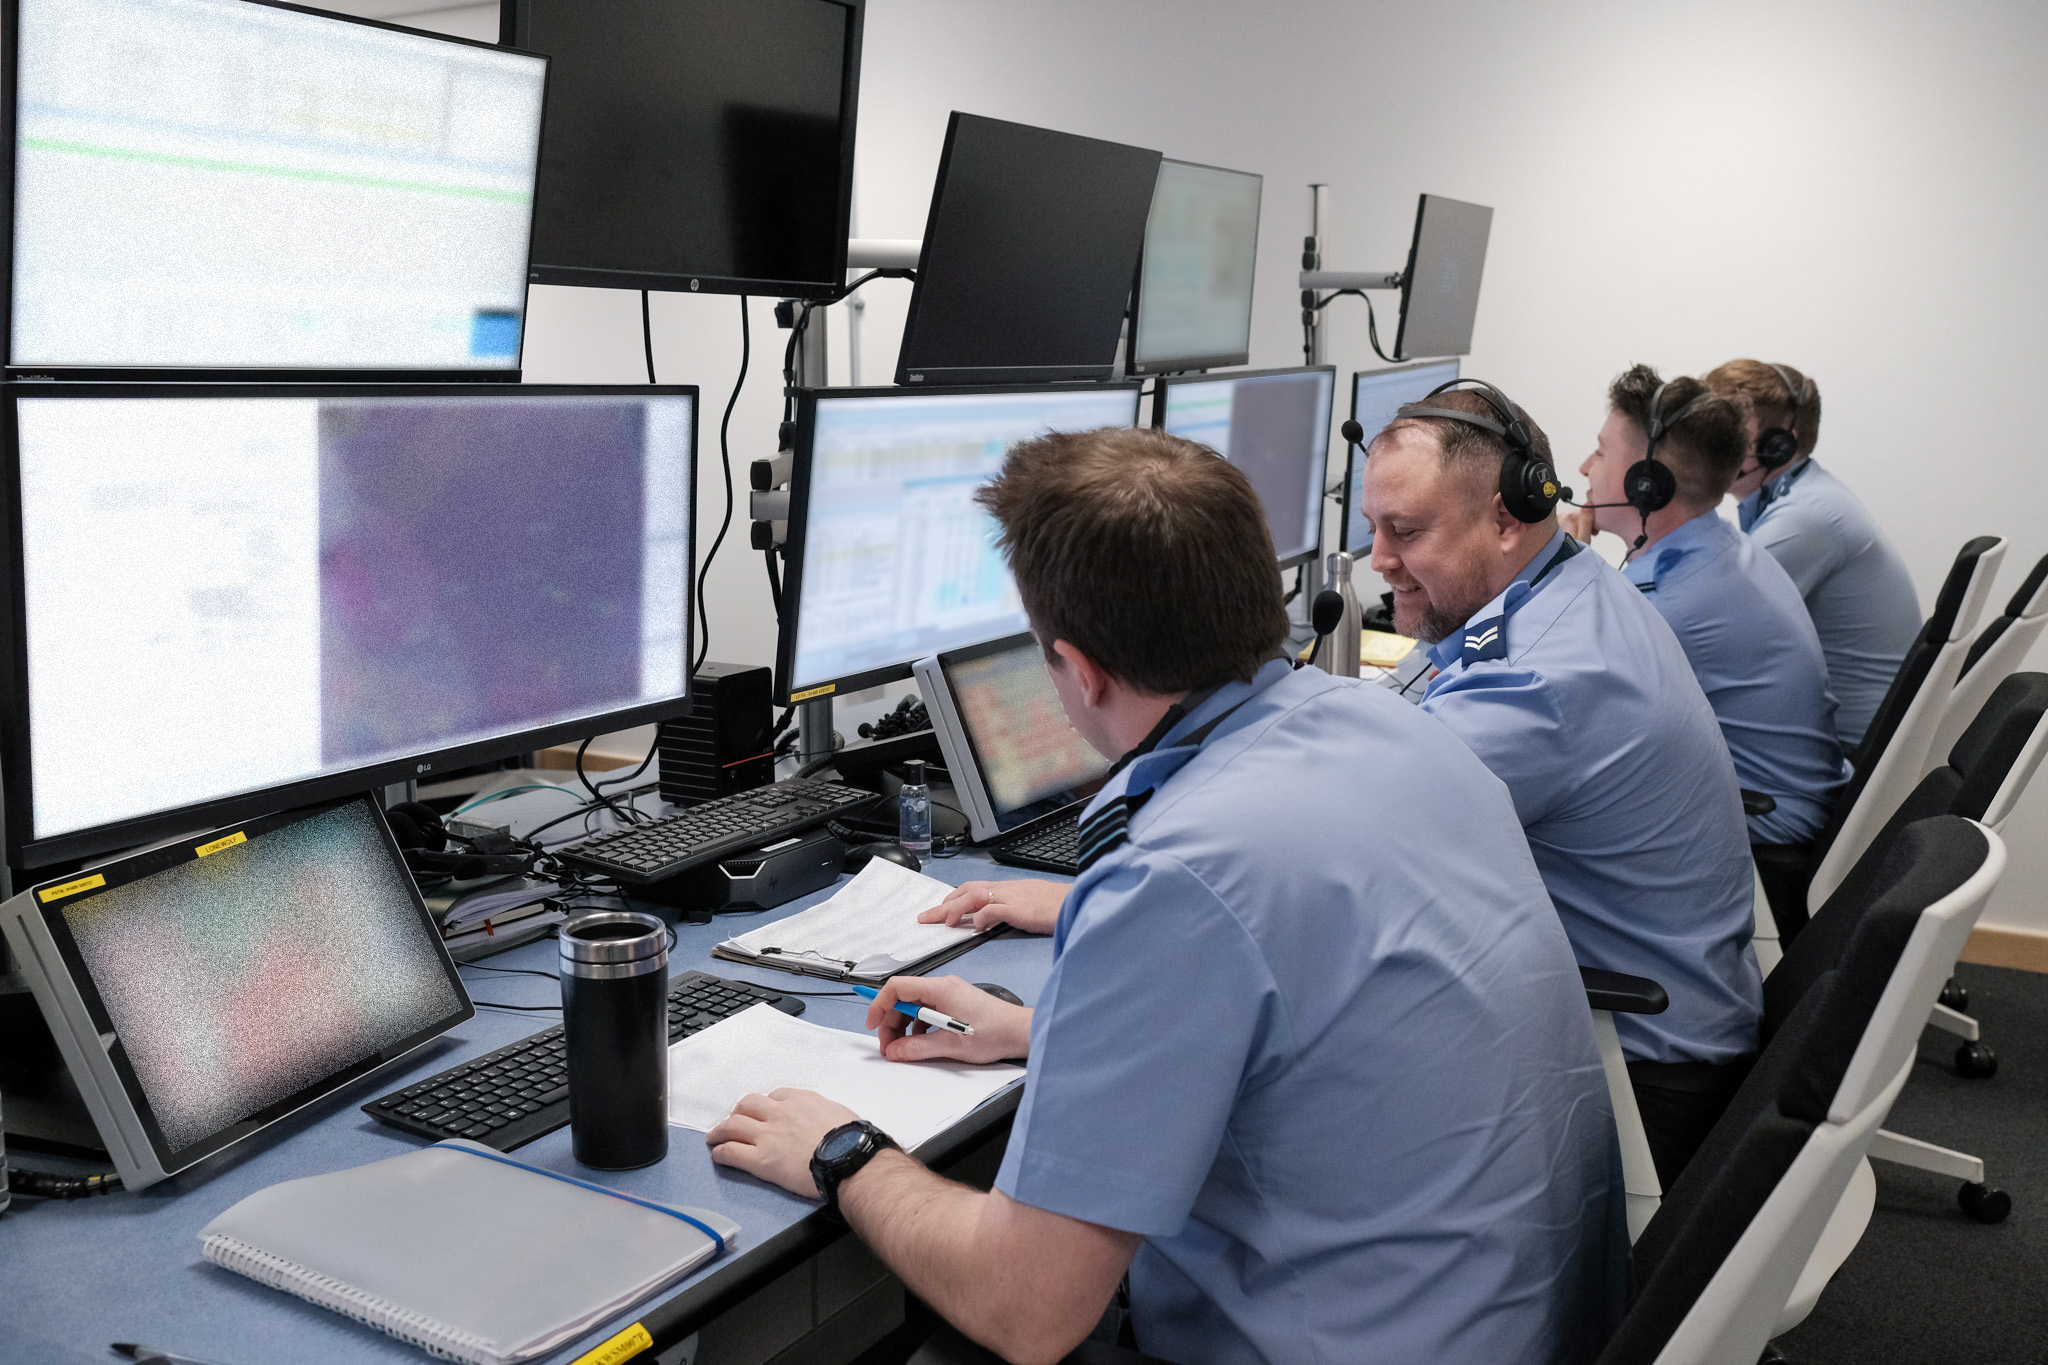 Image shows RAF aviators using computers in office.